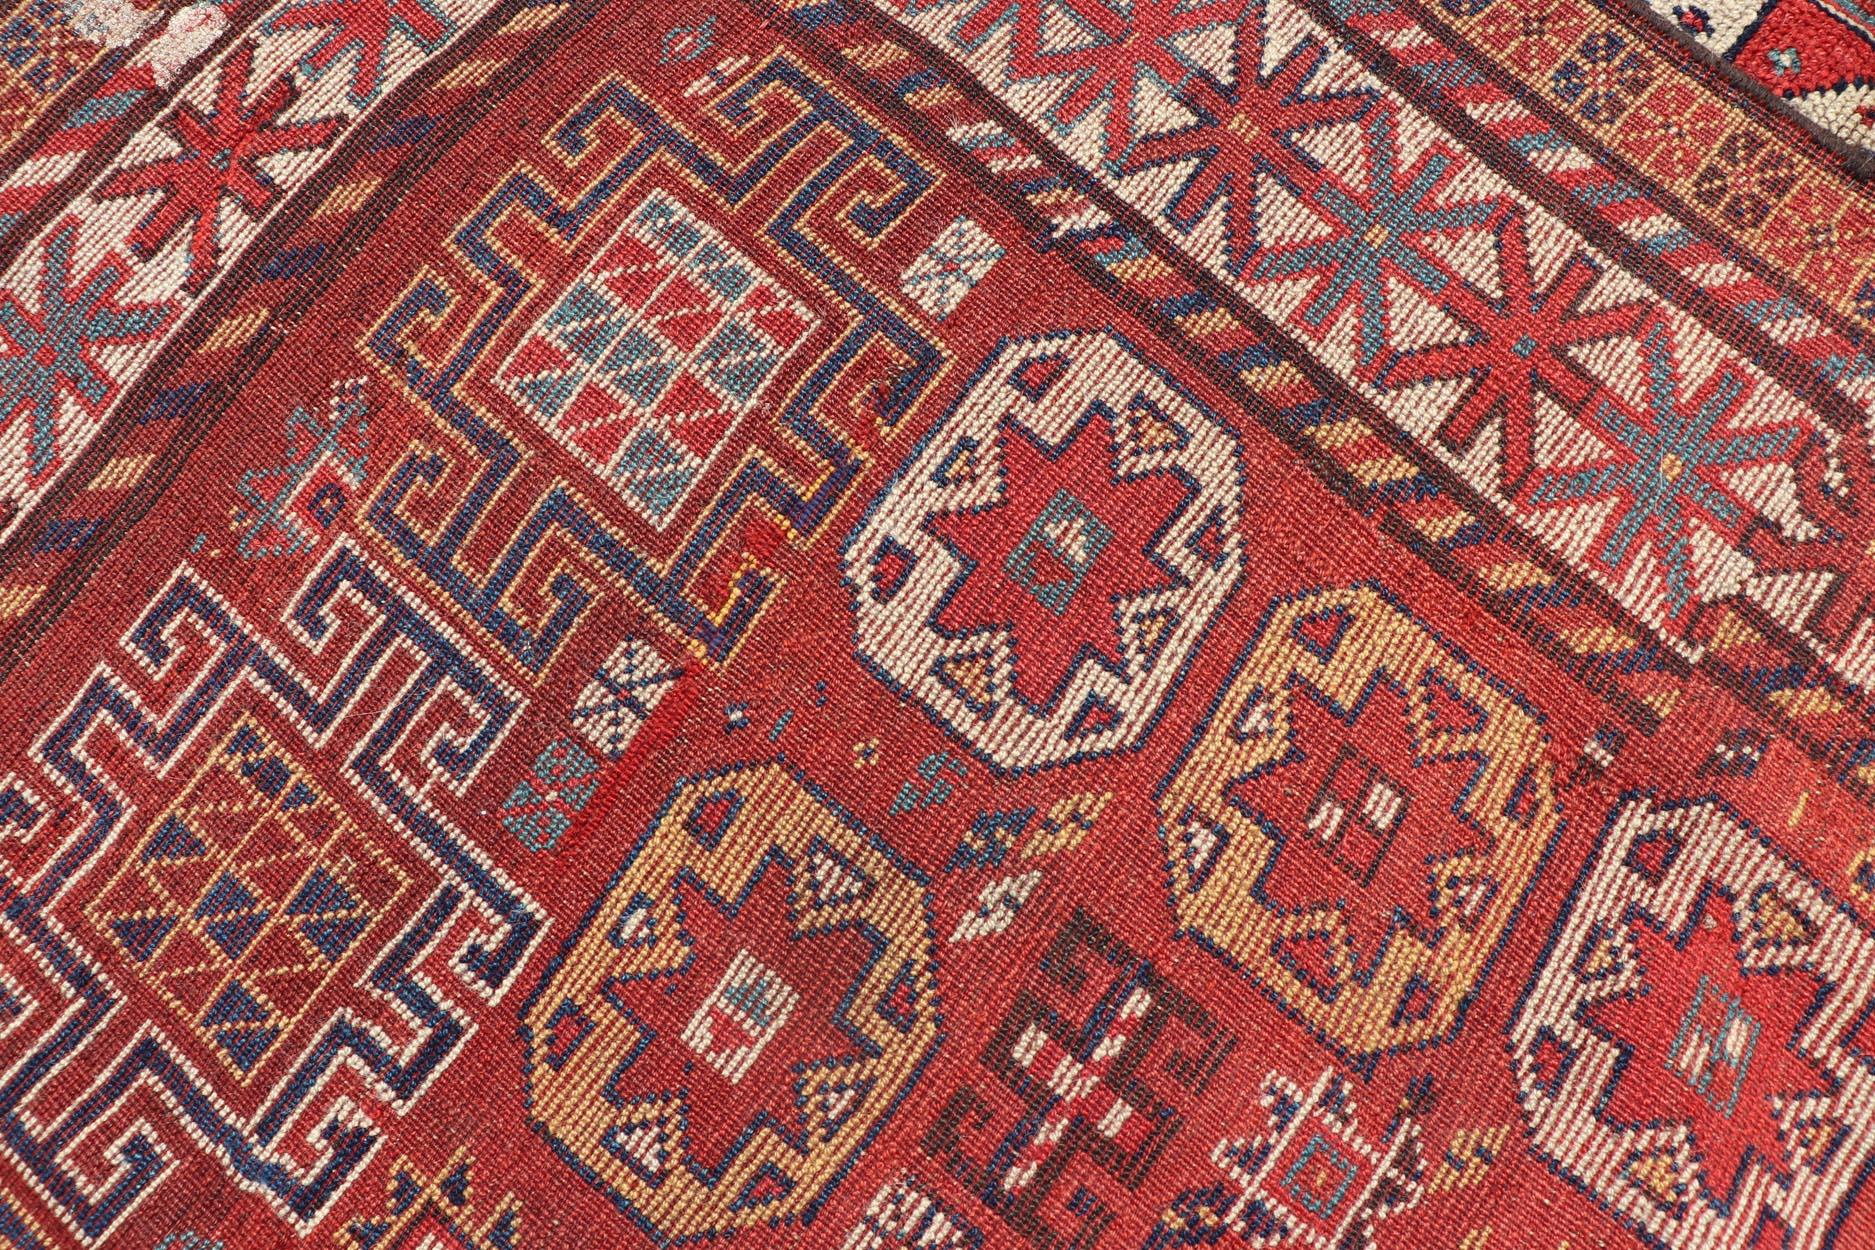 Unique Antique Qashqai Rug with Geometric Motifs in Red, Blue, and Golden Yellow For Sale 8